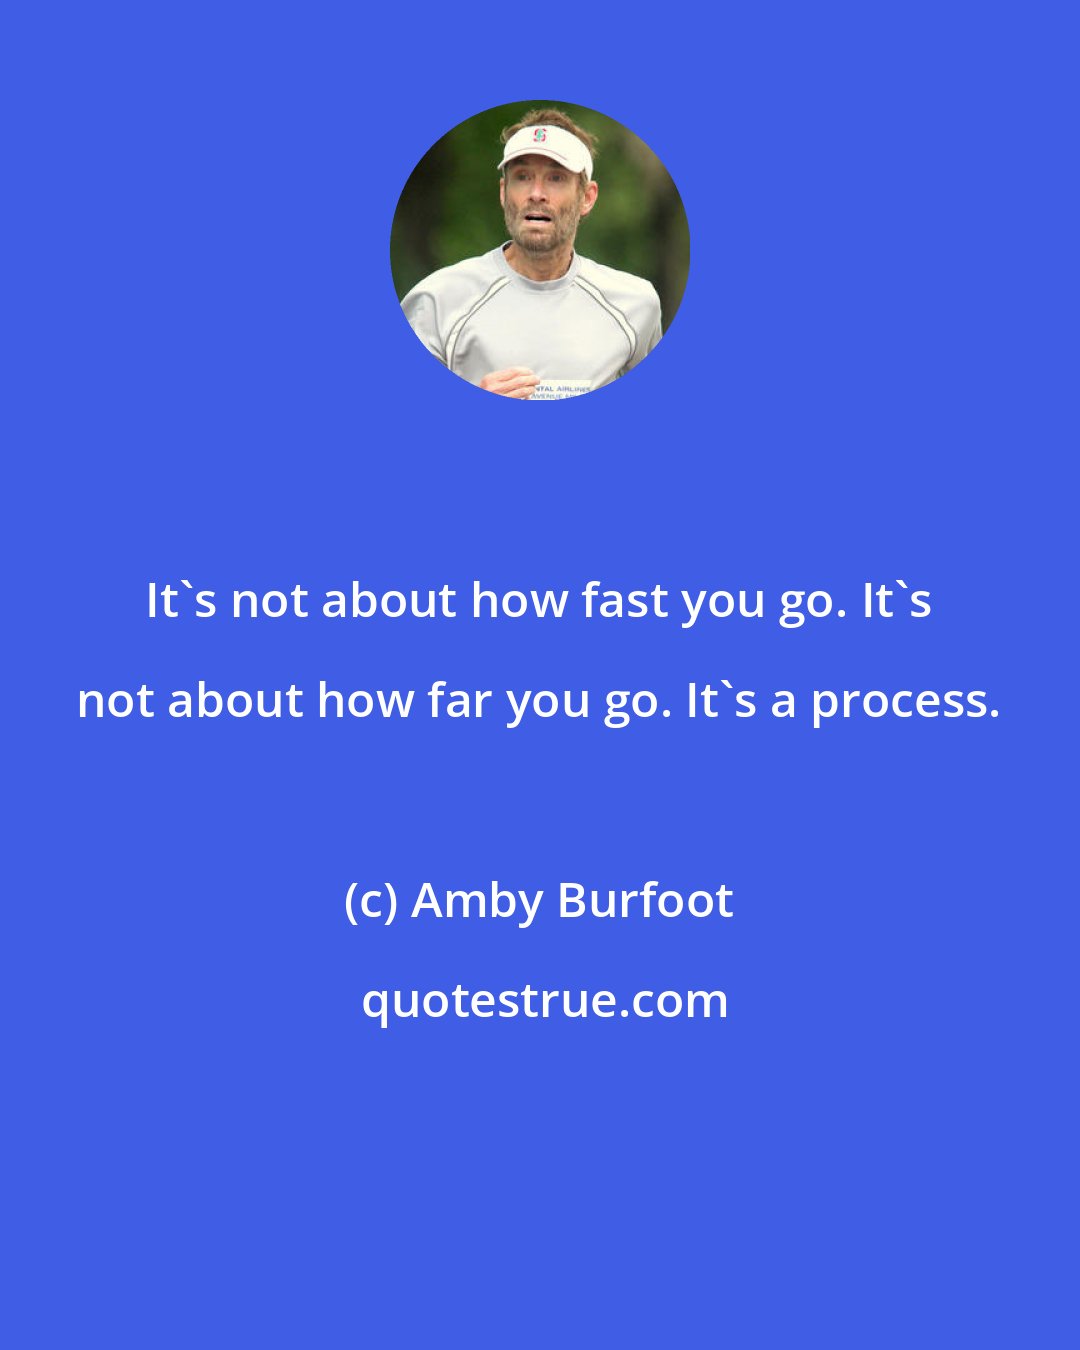 Amby Burfoot: It's not about how fast you go. It's not about how far you go. It's a process.